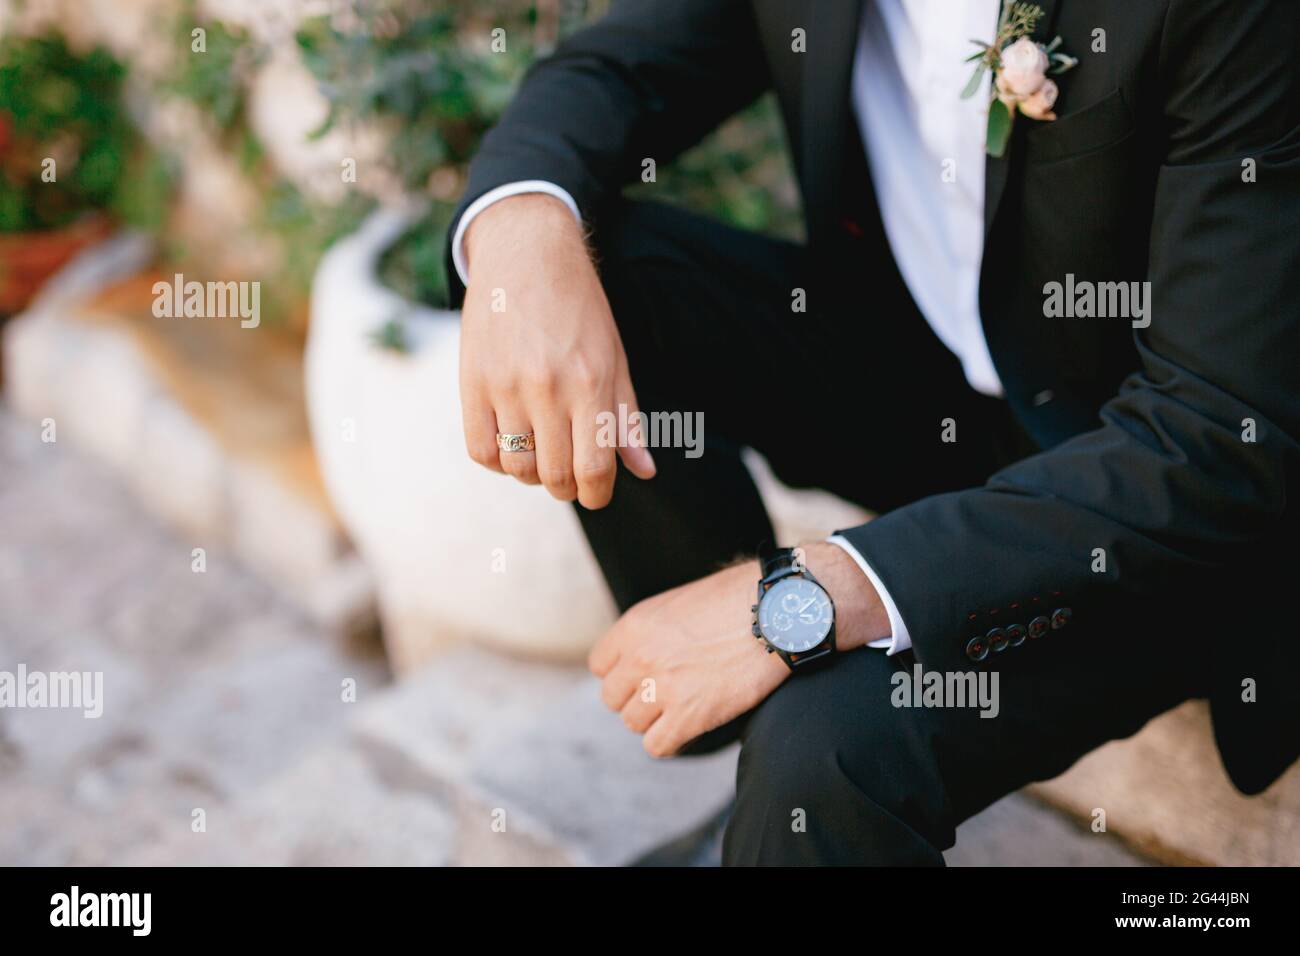 A man in a suit with a boutonniere and a wristwatch is sitting on a step, close-up Stock Photo